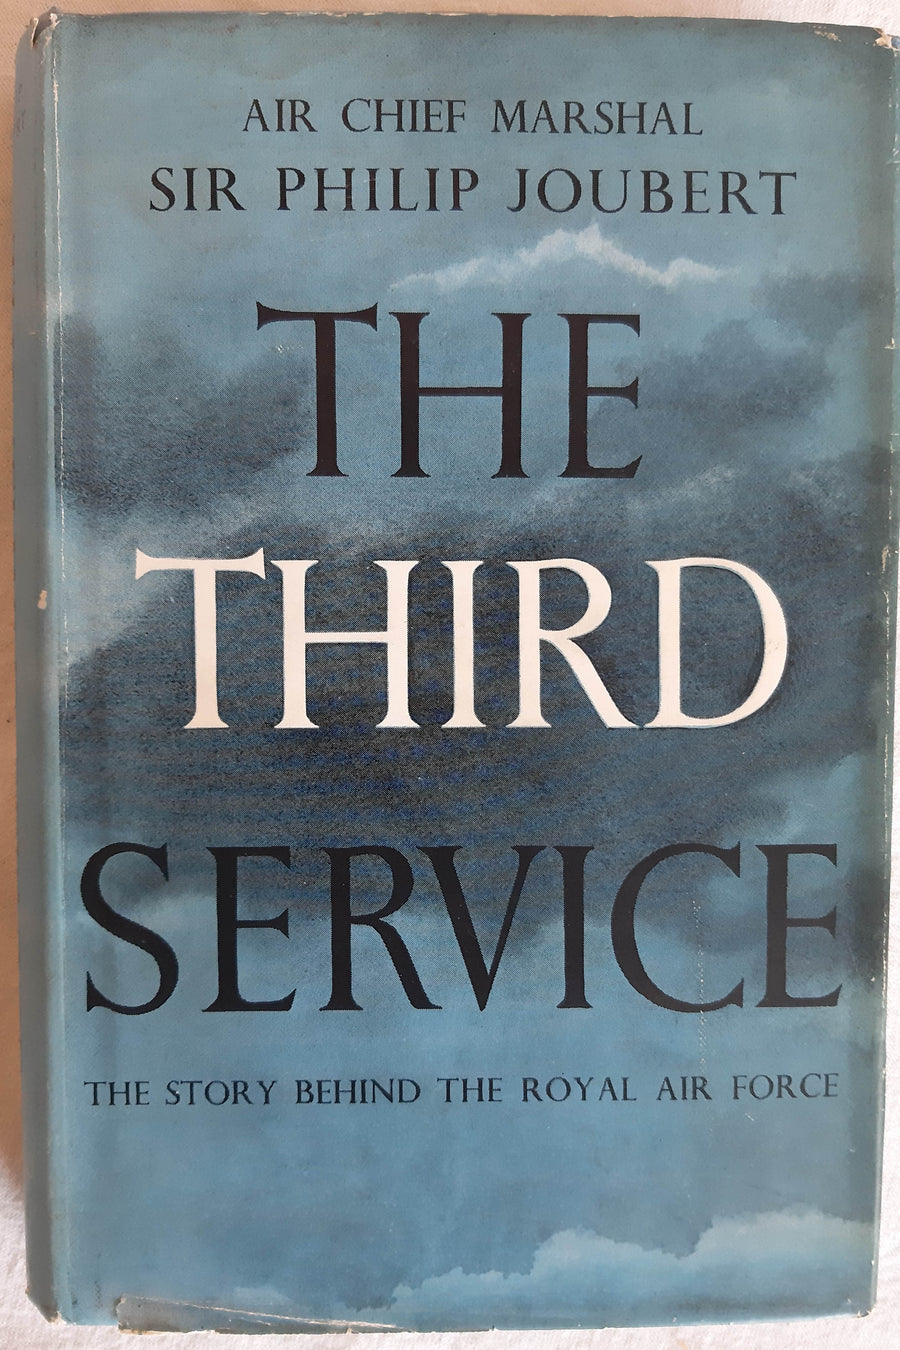 THE THIRD SERVICE THE STORY BEHIND THE ROYAL AIR FORCE